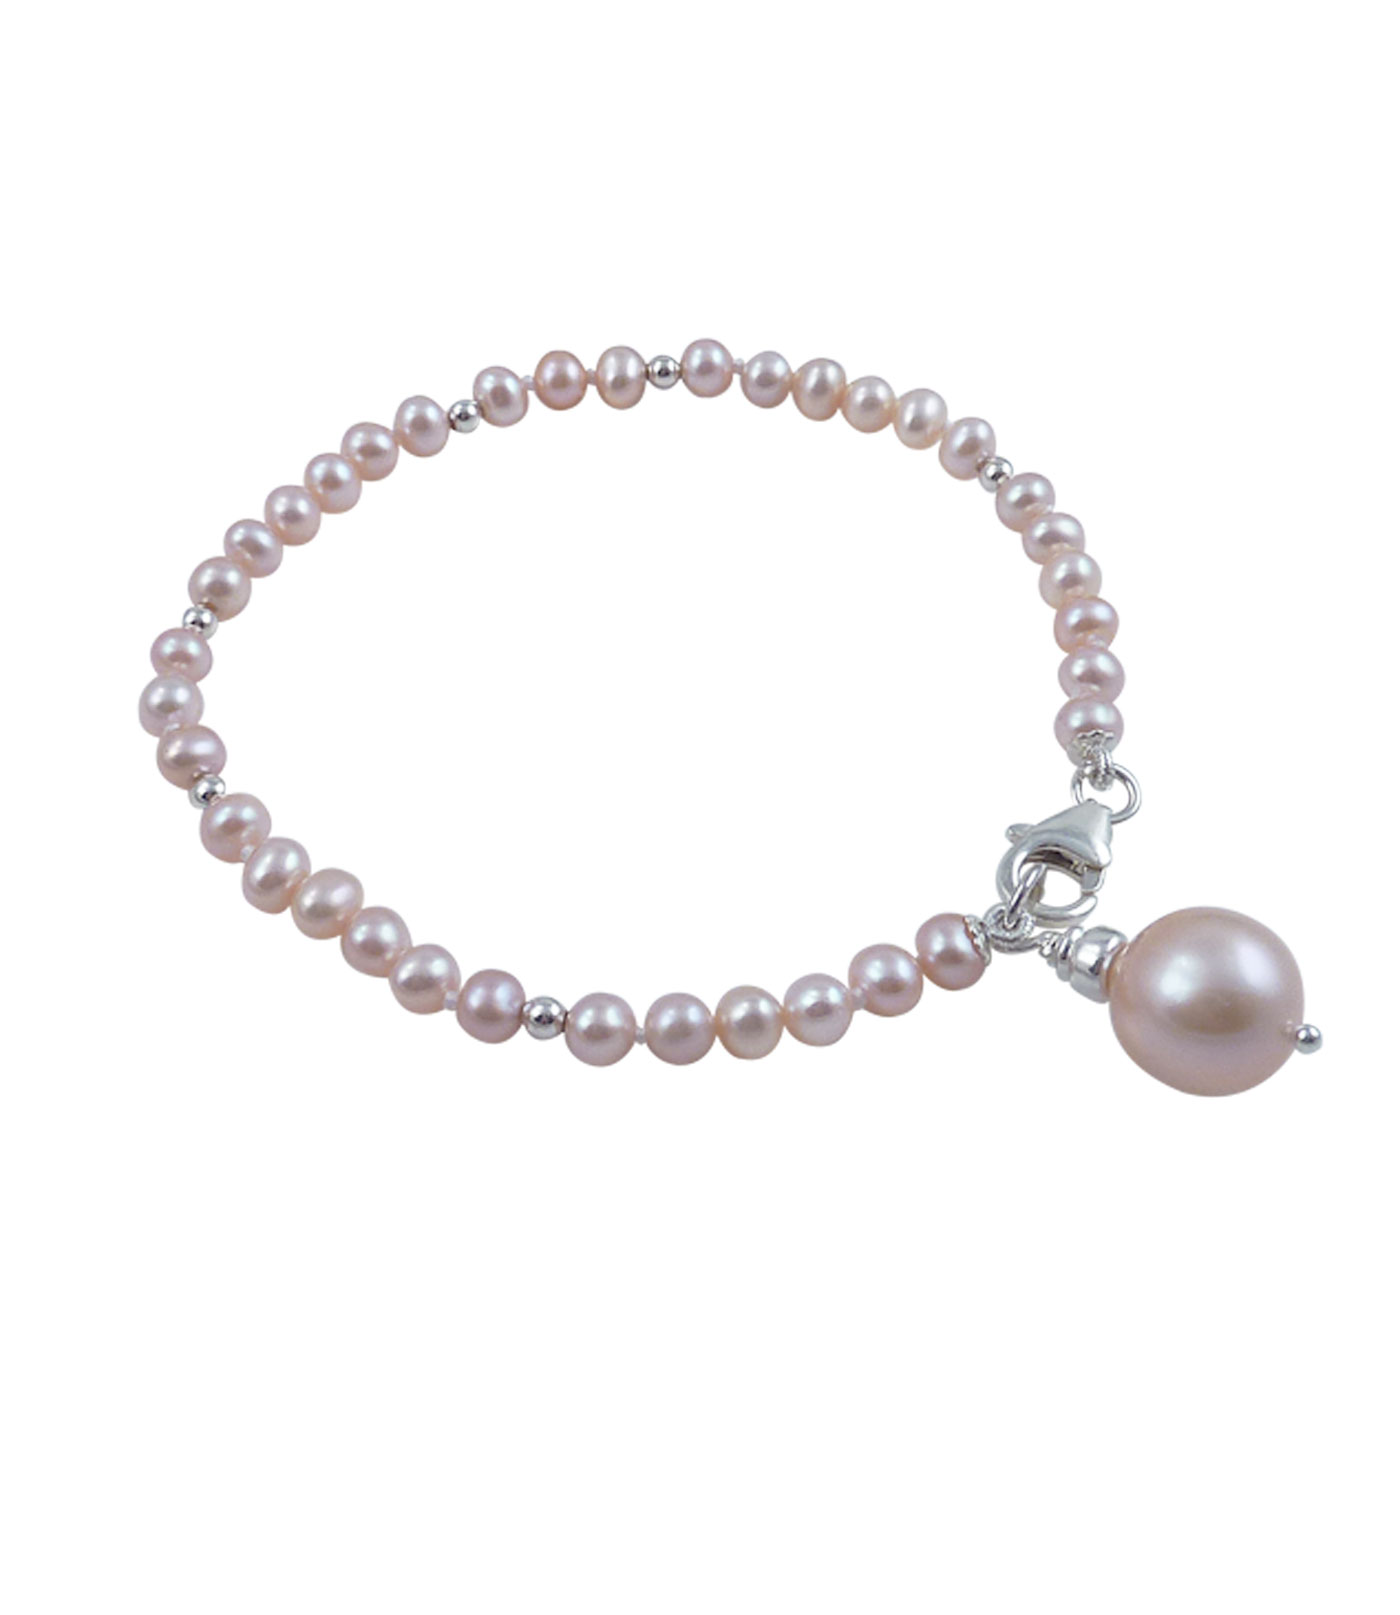 Pearl, Charm, and Leather bracelet